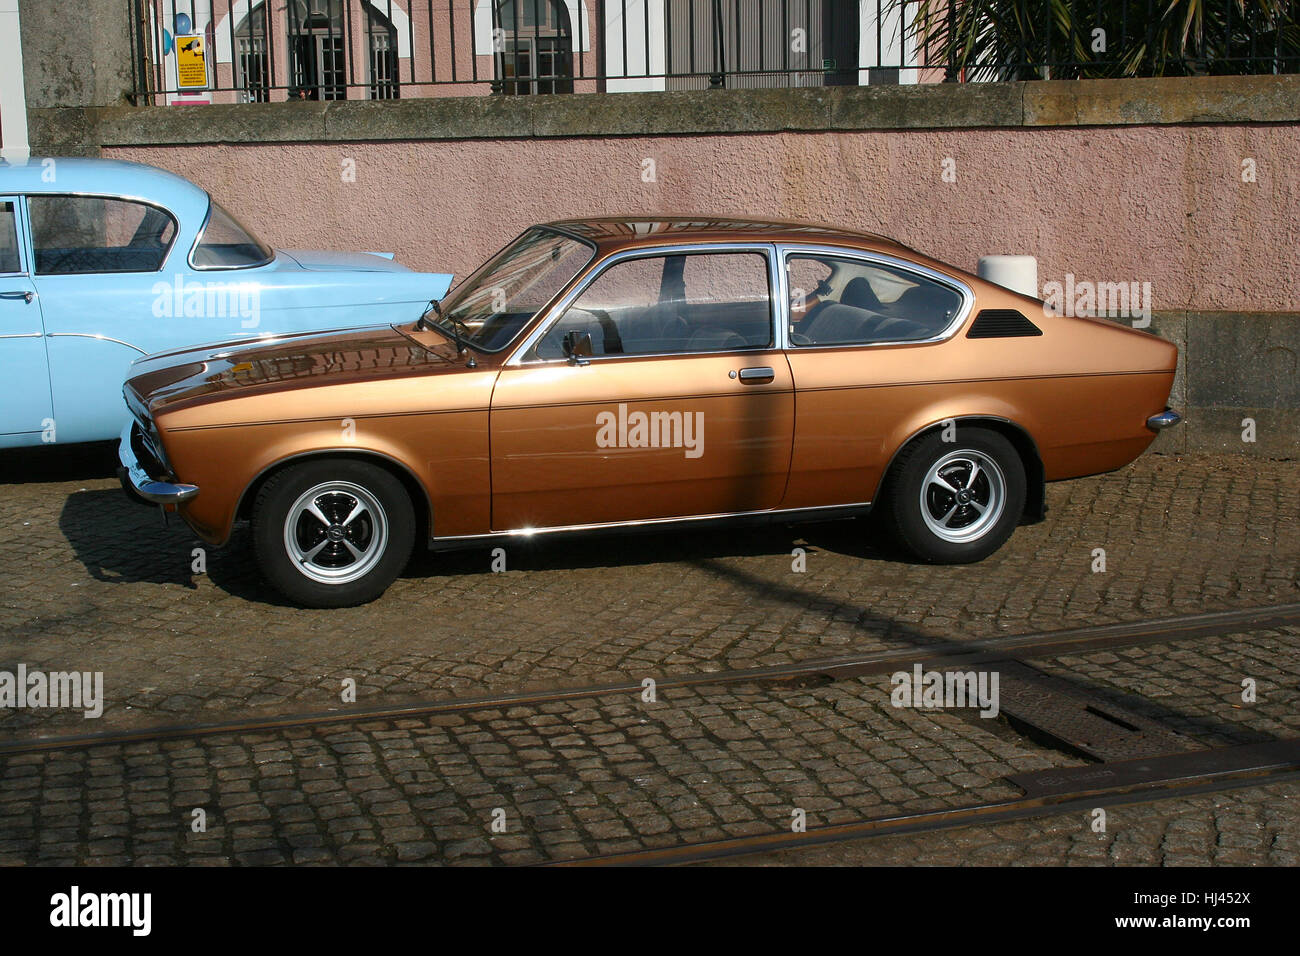 Opel Kadett C High Resolution Stock Photography and Images - Alamy